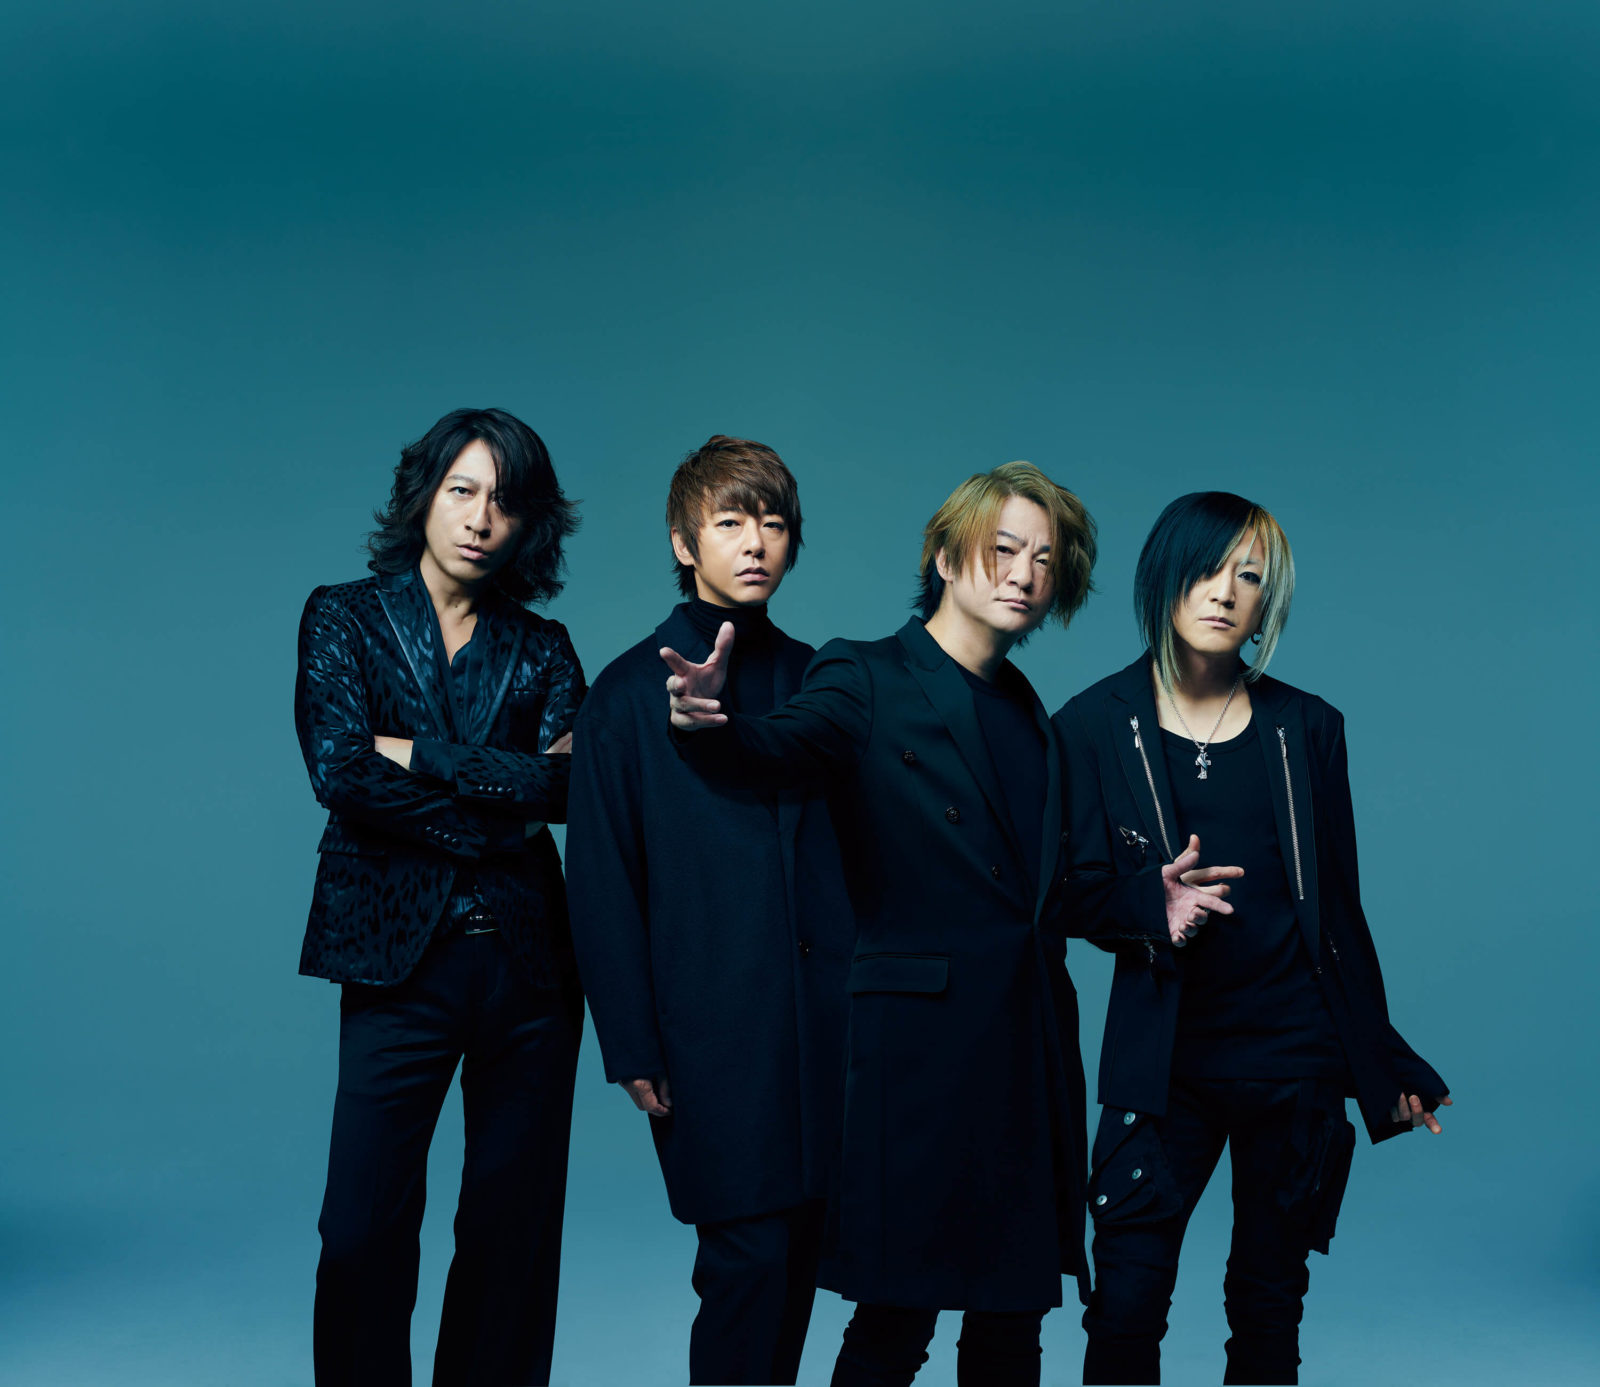 「GLAY Special Live 2020 DEMOCRACY 25th INTO THE WILD Presented by WOWOW」放送決定サムネイル画像!